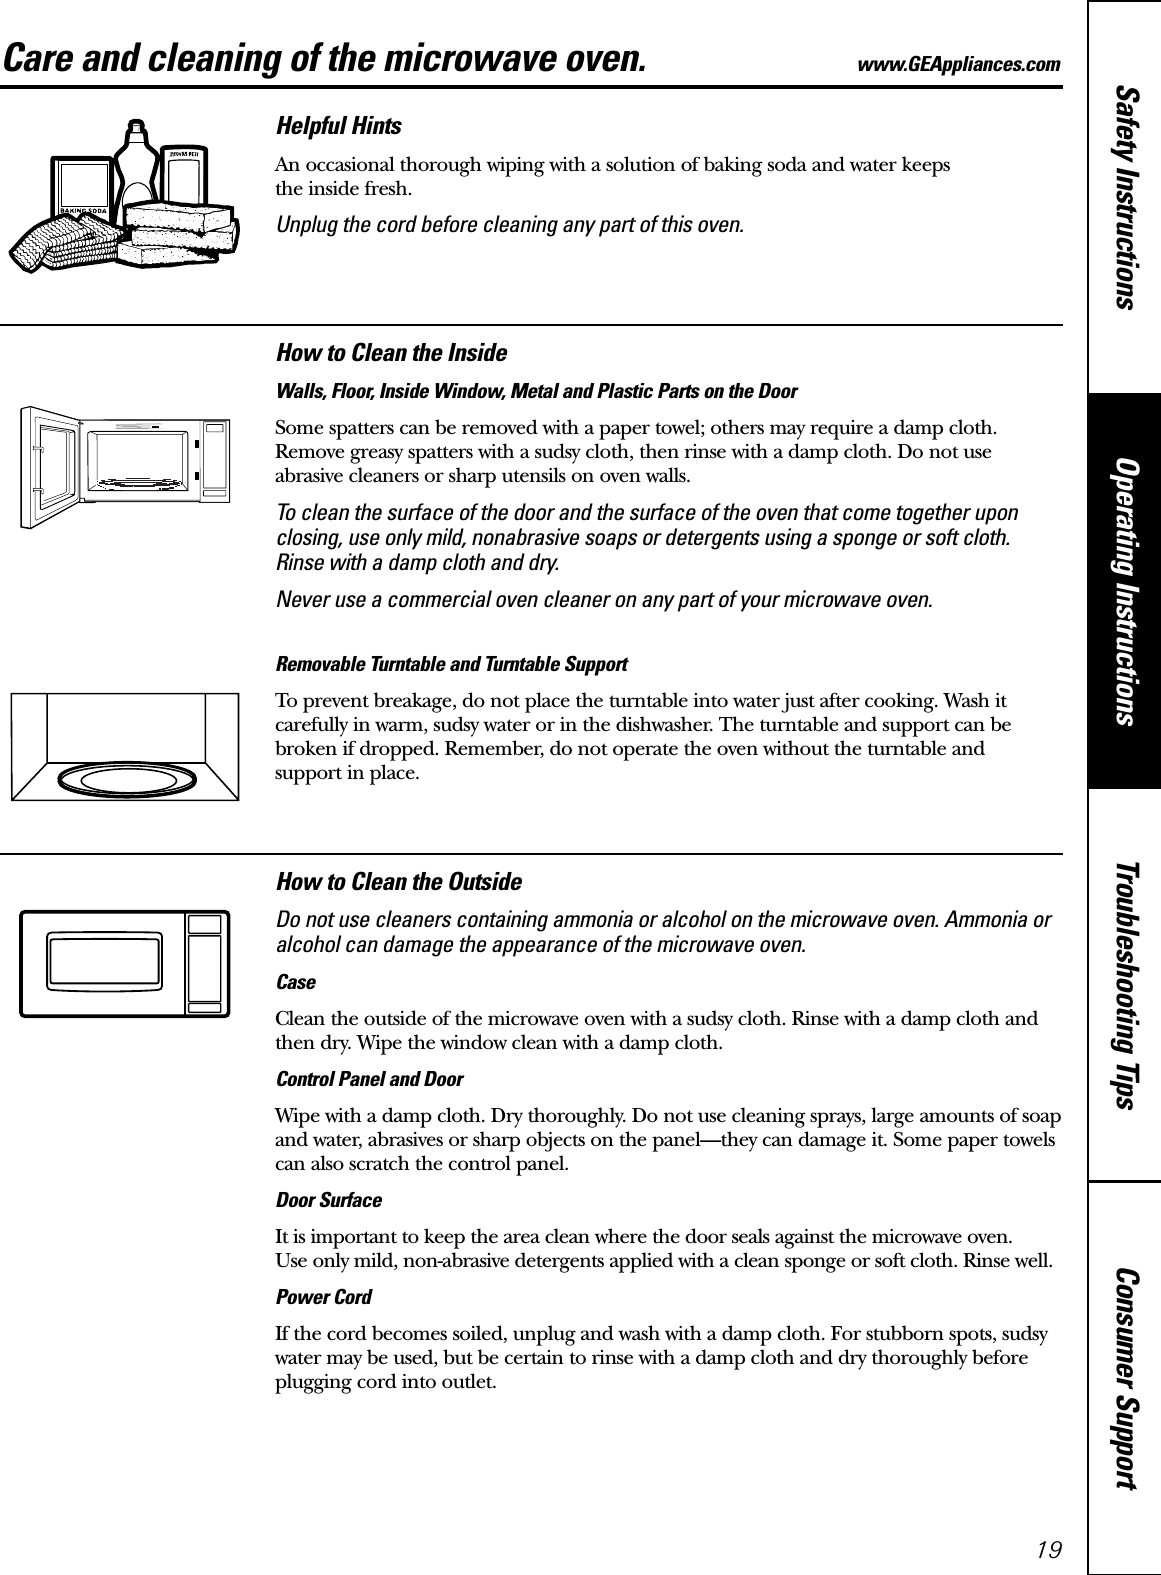 Consumer SupportTroubleshooting TipsOperating InstructionsSafety Instructions19Care and cleaning of the microwave oven. www.GEAppliances.com Helpful HintsAn occasional thorough wiping with a solution of baking soda and water keeps the inside fresh.Unplug the cord before cleaning any part of this oven.How to Clean the InsideWalls, Floor, Inside Window, Metal and Plastic Parts on the DoorSome spatters can be removed with a paper towel; others may require a damp cloth.Remove greasy spatters with a sudsy cloth, then rinse with a damp cloth. Do not use abrasive cleaners or sharp utensils on oven walls. To clean the surface of the door and the surface of the oven that come together uponclosing, use only mild, nonabrasive soaps or detergents using a sponge or soft cloth.Rinse with a damp cloth and dry.Never use a commercial oven cleaner on any part of your microwave oven.Removable Turntable and Turntable Support To prevent breakage, do not place the turntable into water just after cooking. Wash itcarefully in warm, sudsy water or in the dishwasher. The turntable and support can bebroken if dropped. Remember, do not operate the oven without the turntable and support in place.How to Clean the OutsideDo not use cleaners containing ammonia or alcohol on the microwave oven. Ammonia oralcohol can damage the appearance of the microwave oven.CaseClean the outside of the microwave oven with a sudsy cloth. Rinse with a damp cloth andthen dry. Wipe the window clean with a damp cloth. Control Panel and DoorWipe with a damp cloth. Dry thoroughly. Do not use cleaning sprays, large amounts of soapand water, abrasives or sharp objects on the panel—they can damage it. Some paper towelscan also scratch the control panel.Door SurfaceIt is important to keep the area clean where the door seals against the microwave oven. Use only mild, non-abrasive detergents applied with a clean sponge or soft cloth. Rinse well.Power CordIf the cord becomes soiled, unplug and wash with a damp cloth. For stubborn spots, sudsywater may be used, but be certain to rinse with a damp cloth and dry thoroughly beforeplugging cord into outlet.